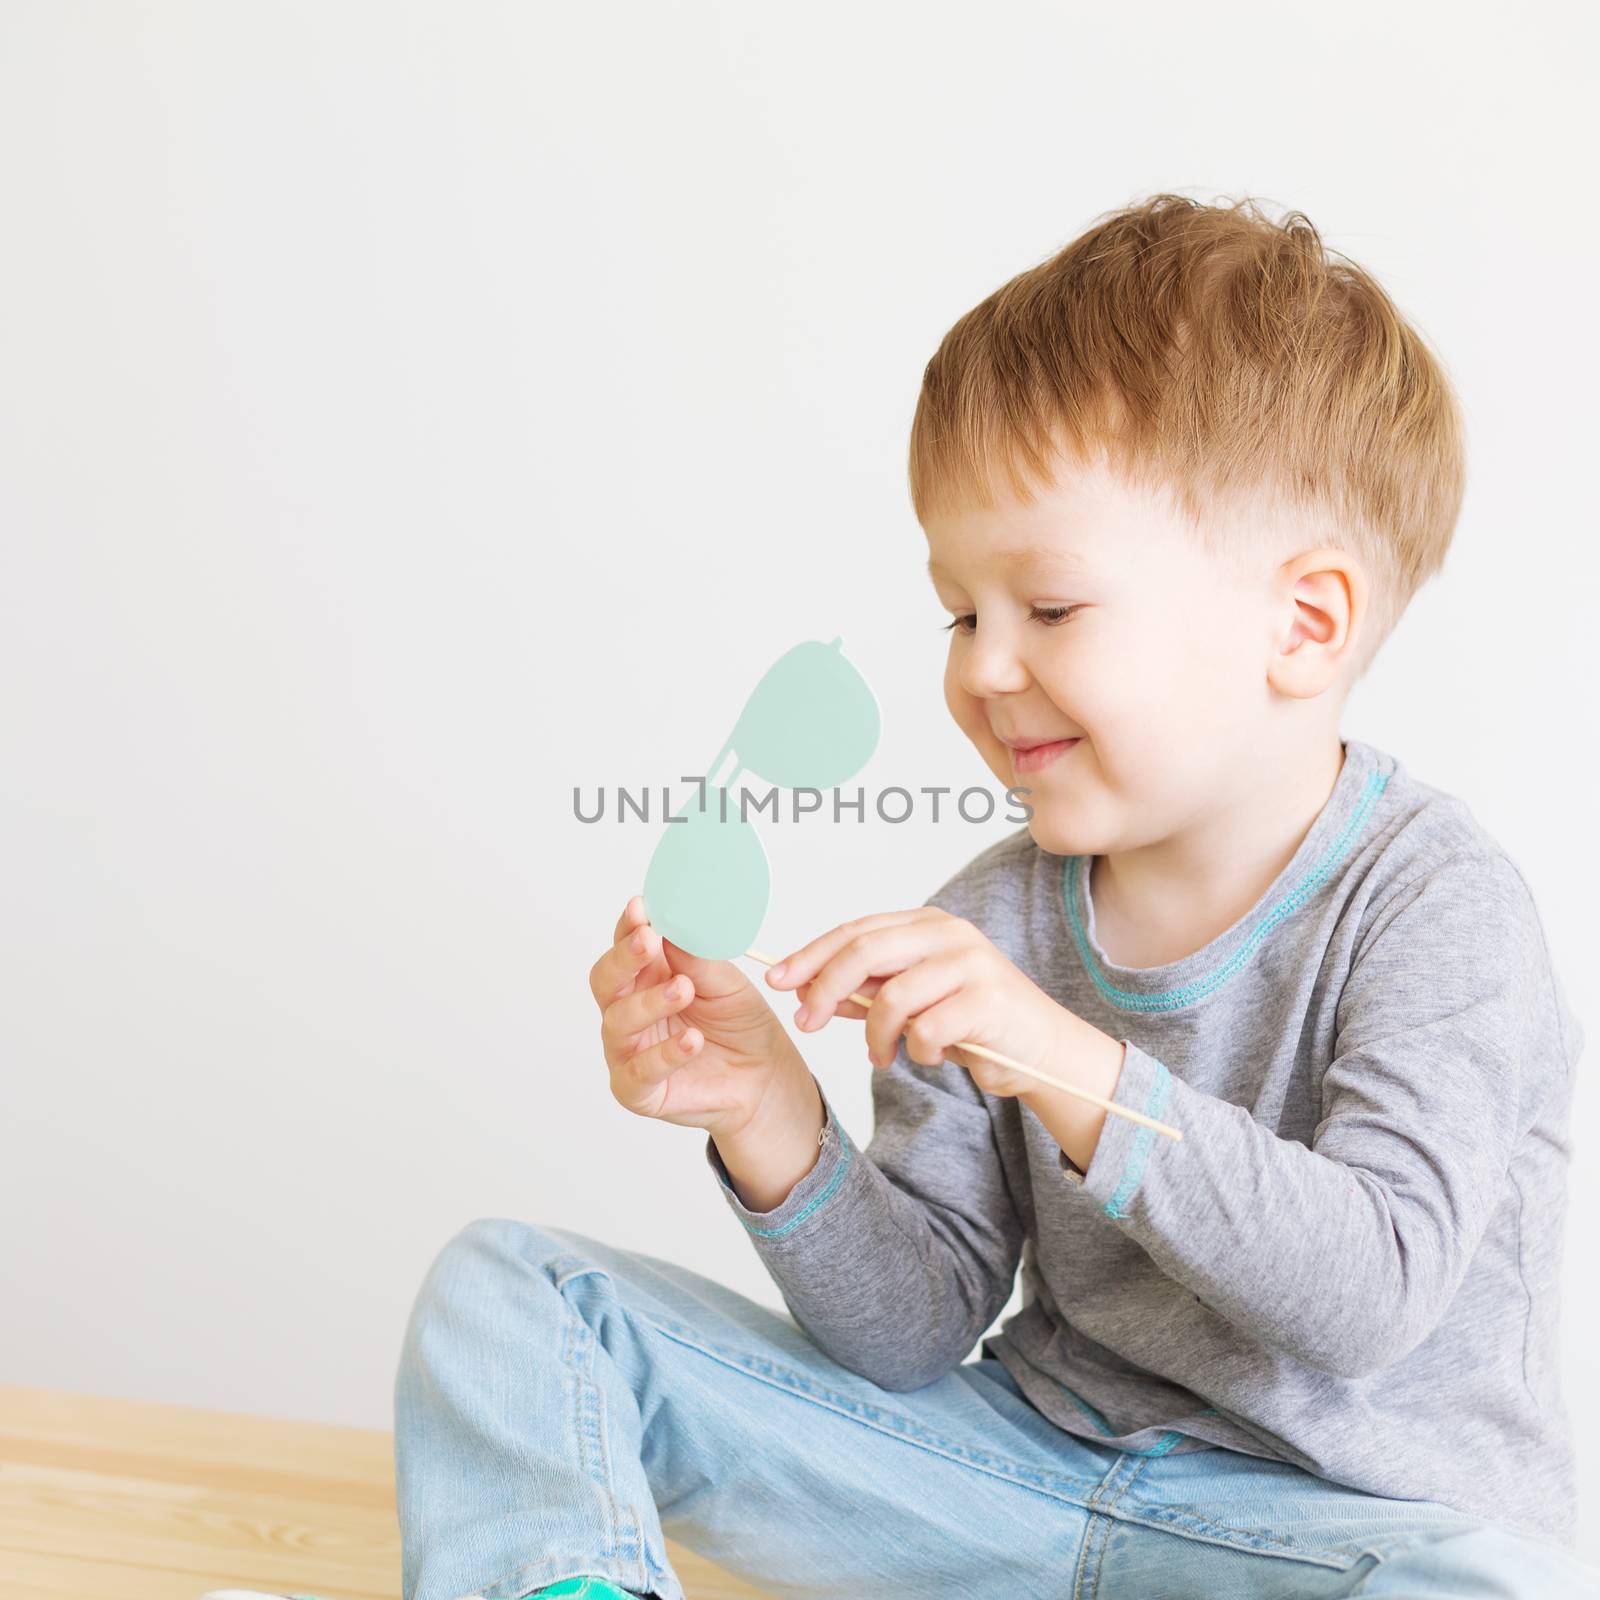 Portrait of a happy adorable little kid with blue paper glasses against a white background. A blind child